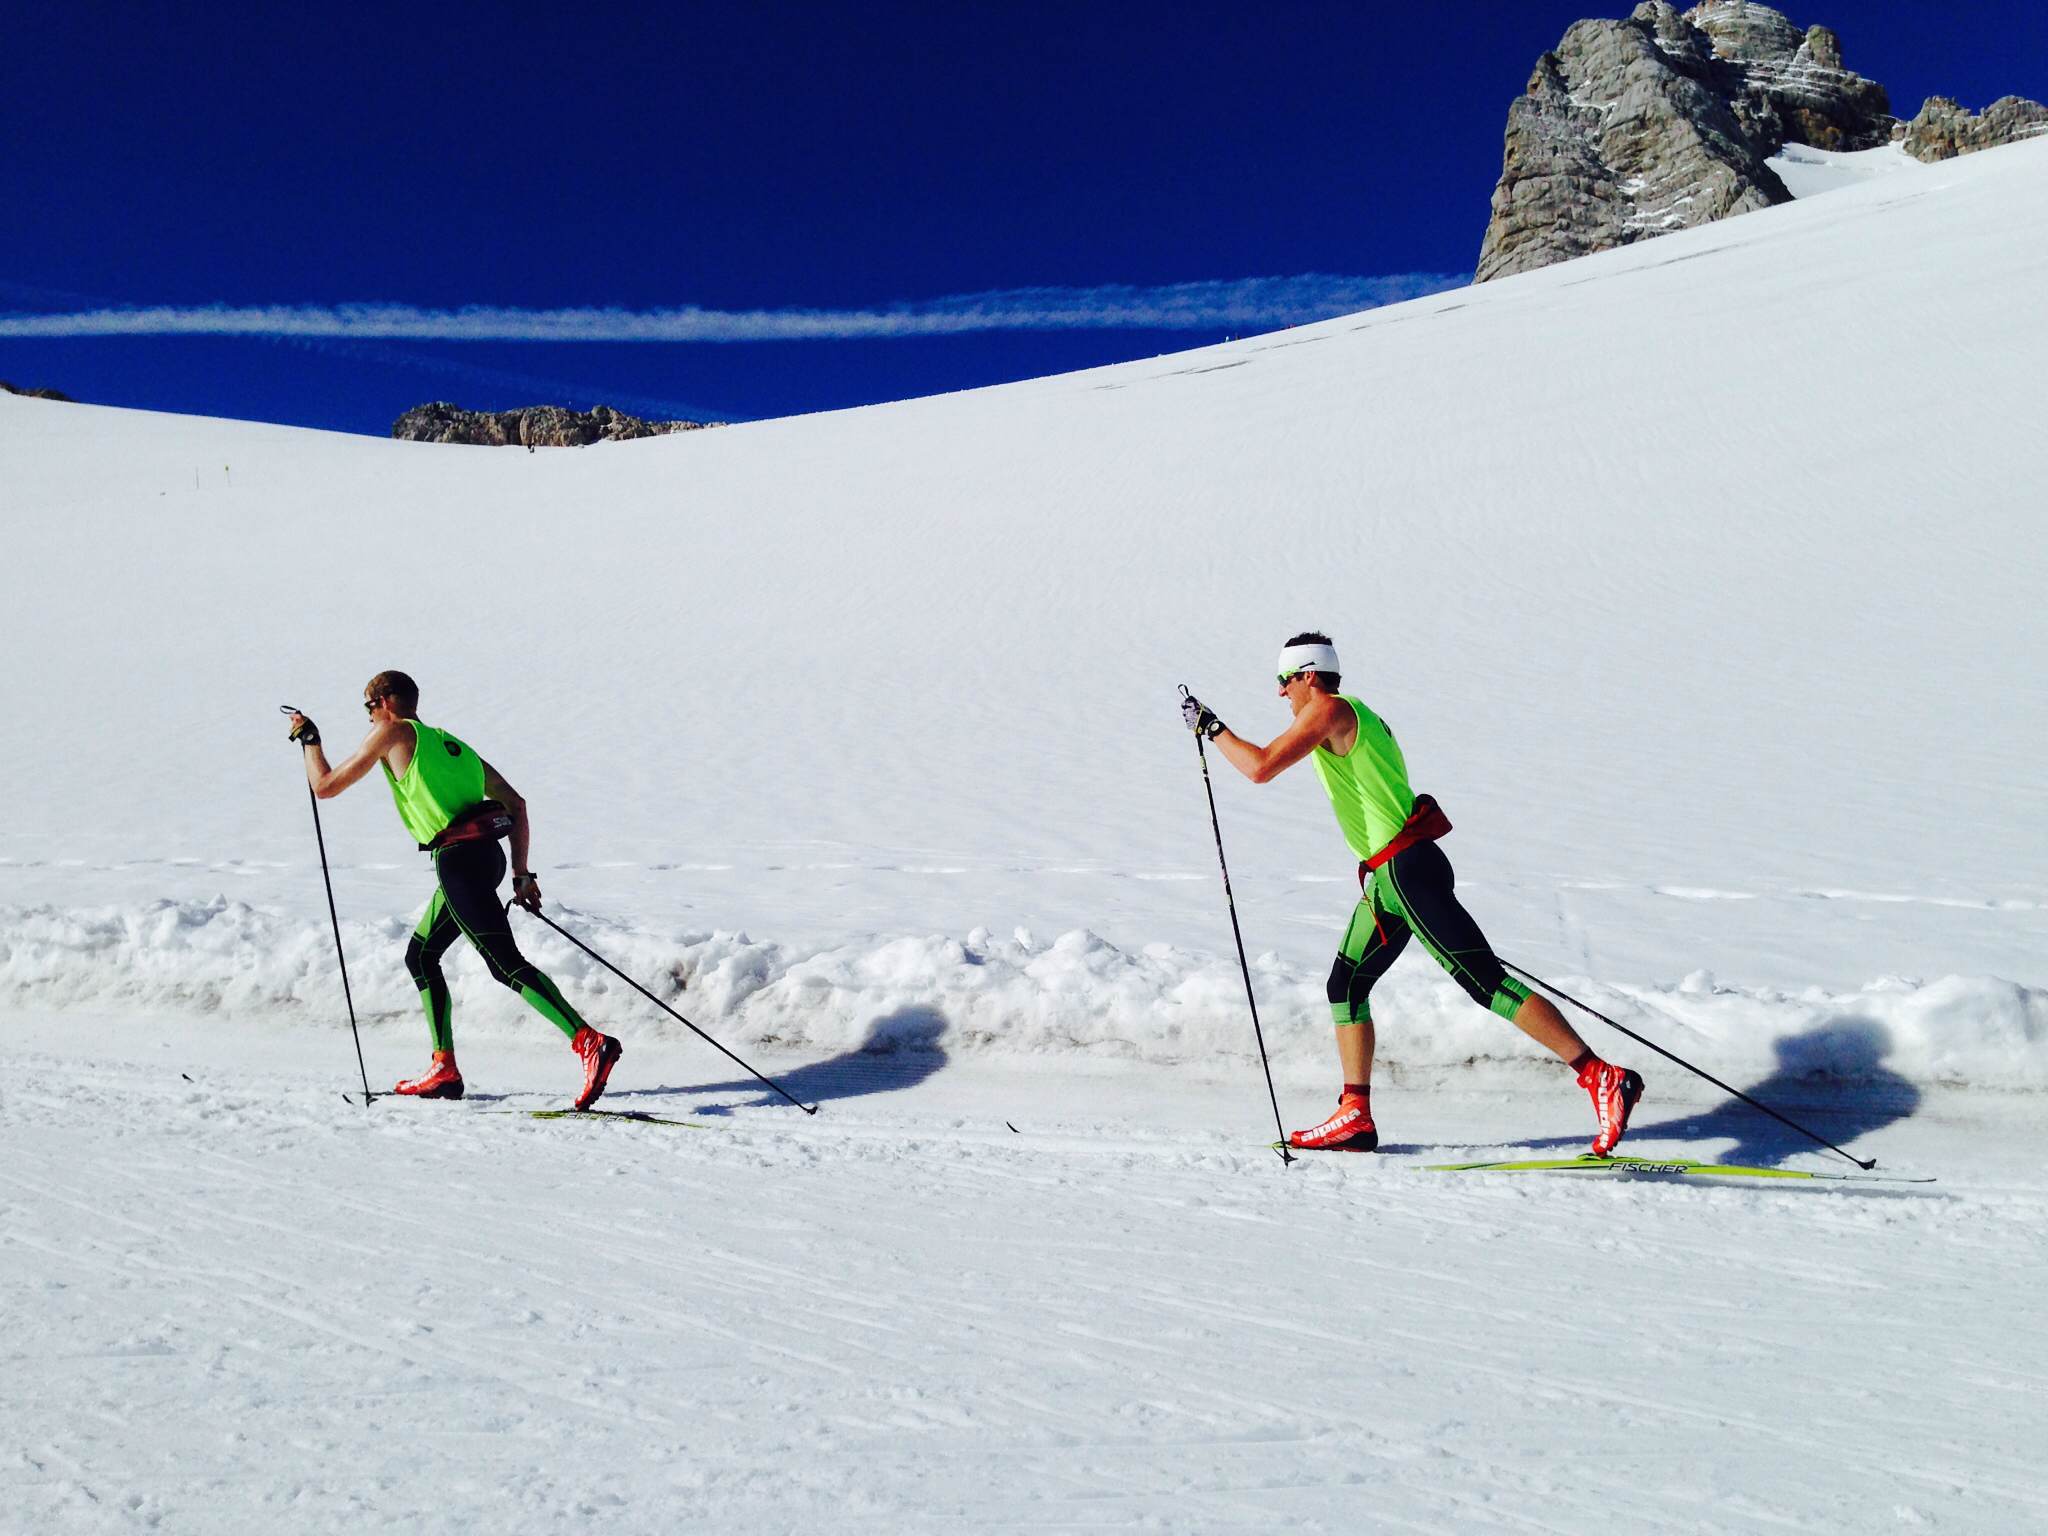 Craftsbury Green Racing Project skiers traverse the Dachstien Glacier in Rasmau, Austria as part of the teams on-snow camp in September 2014.  